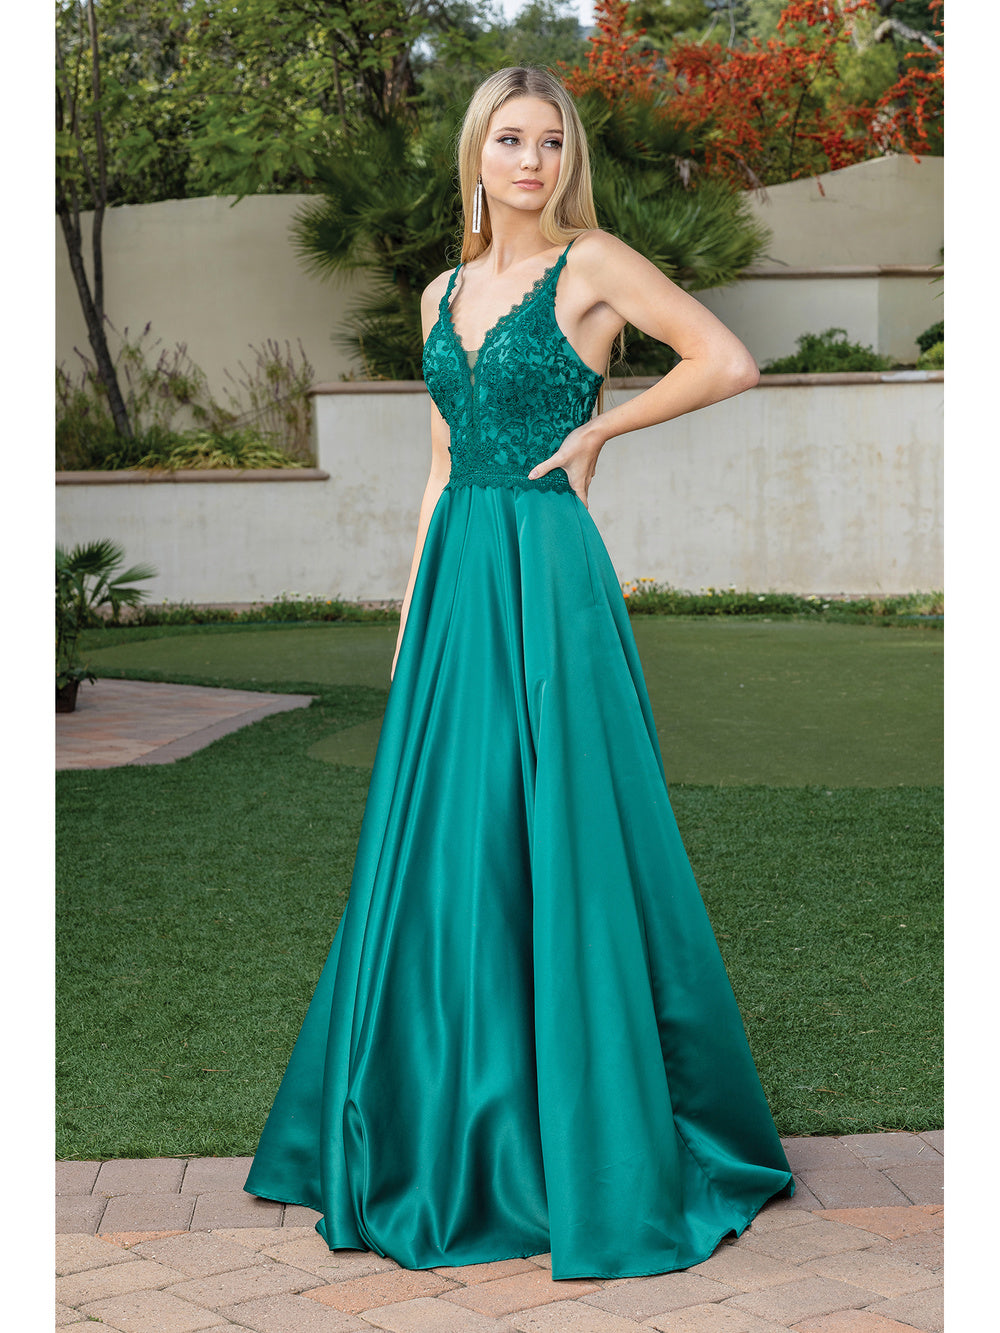 DQ 4260 - Satin A-Line Prom Gown with Lace Embellished V-Neck Bodice Open Lace Up Corset Back & Pockets Dresses Dancing Queen XS HUNTER GREEN 